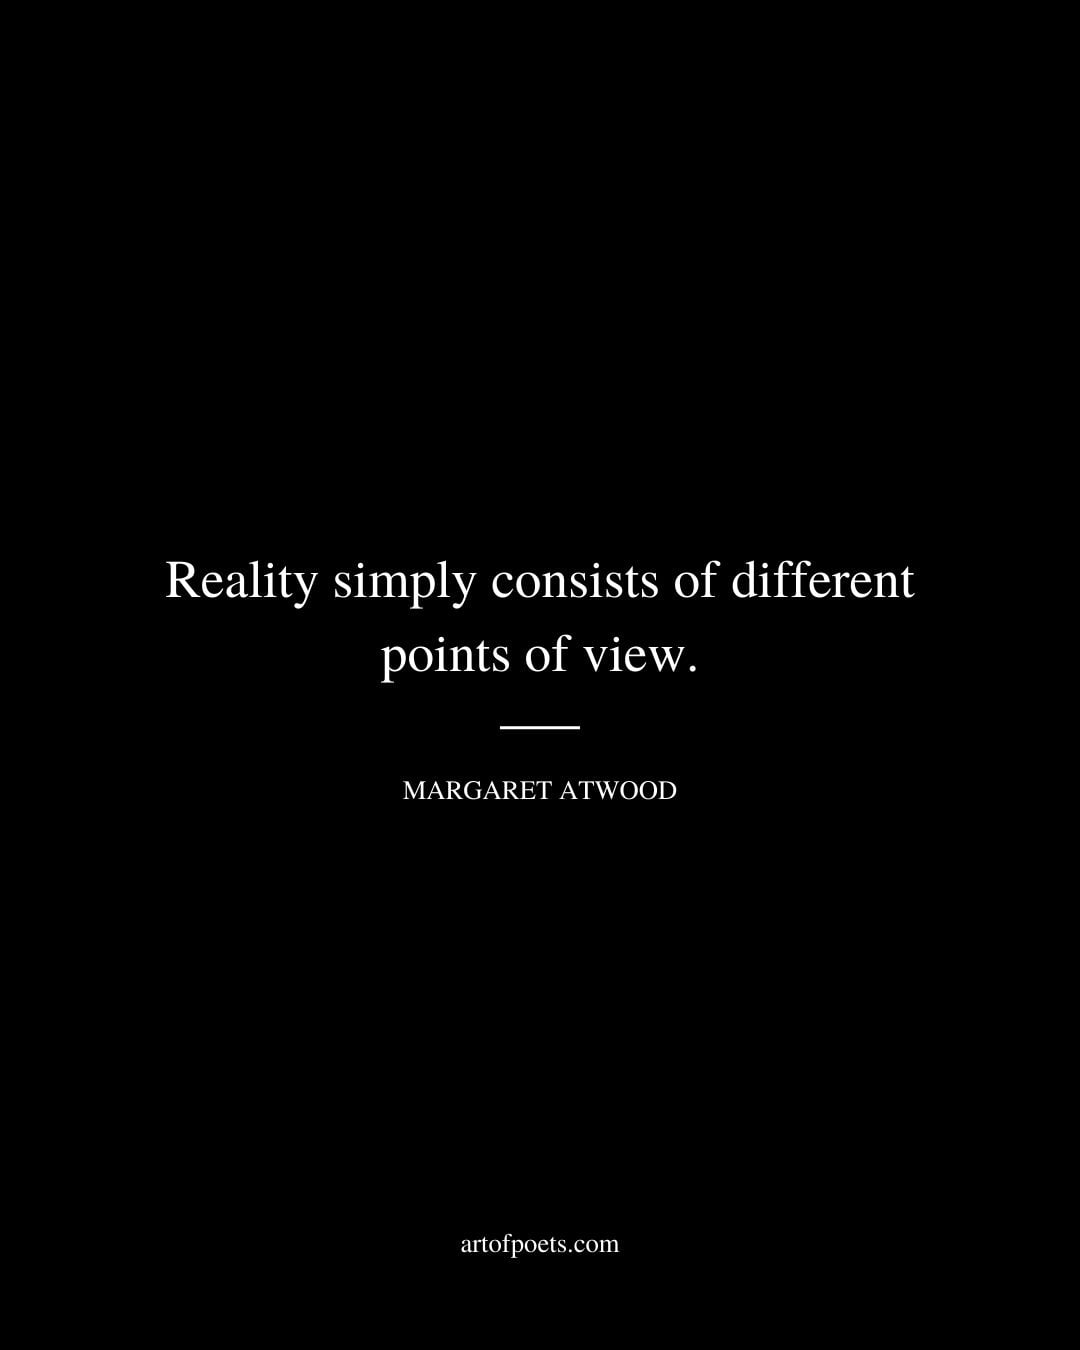 Reality simply consists of different points of view